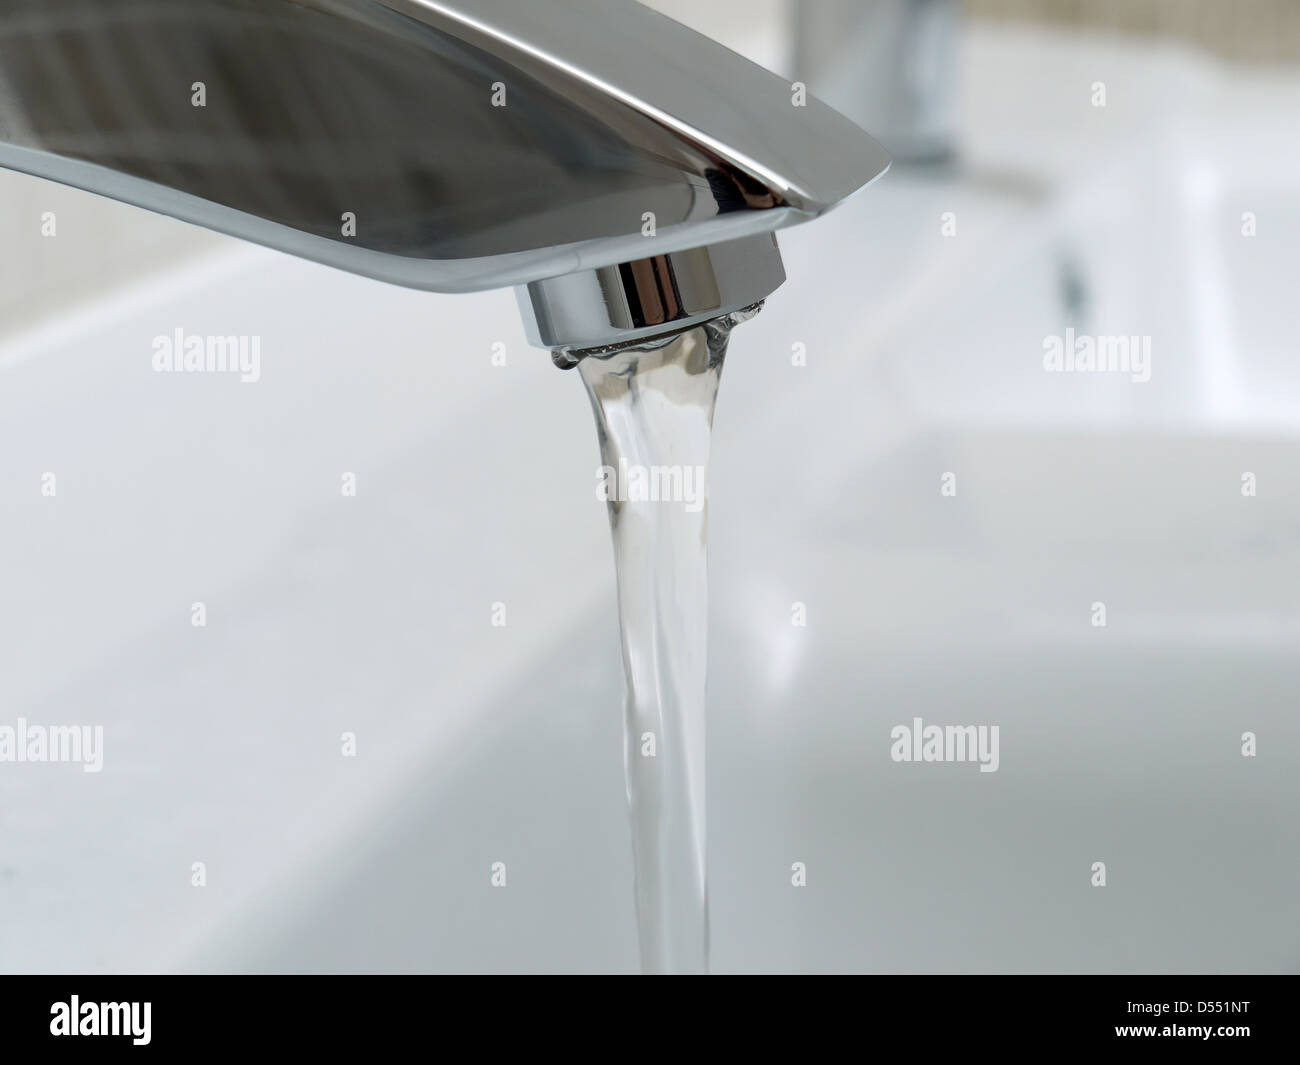 Closeup of bathroom chrome faucet with running water Stock Photo